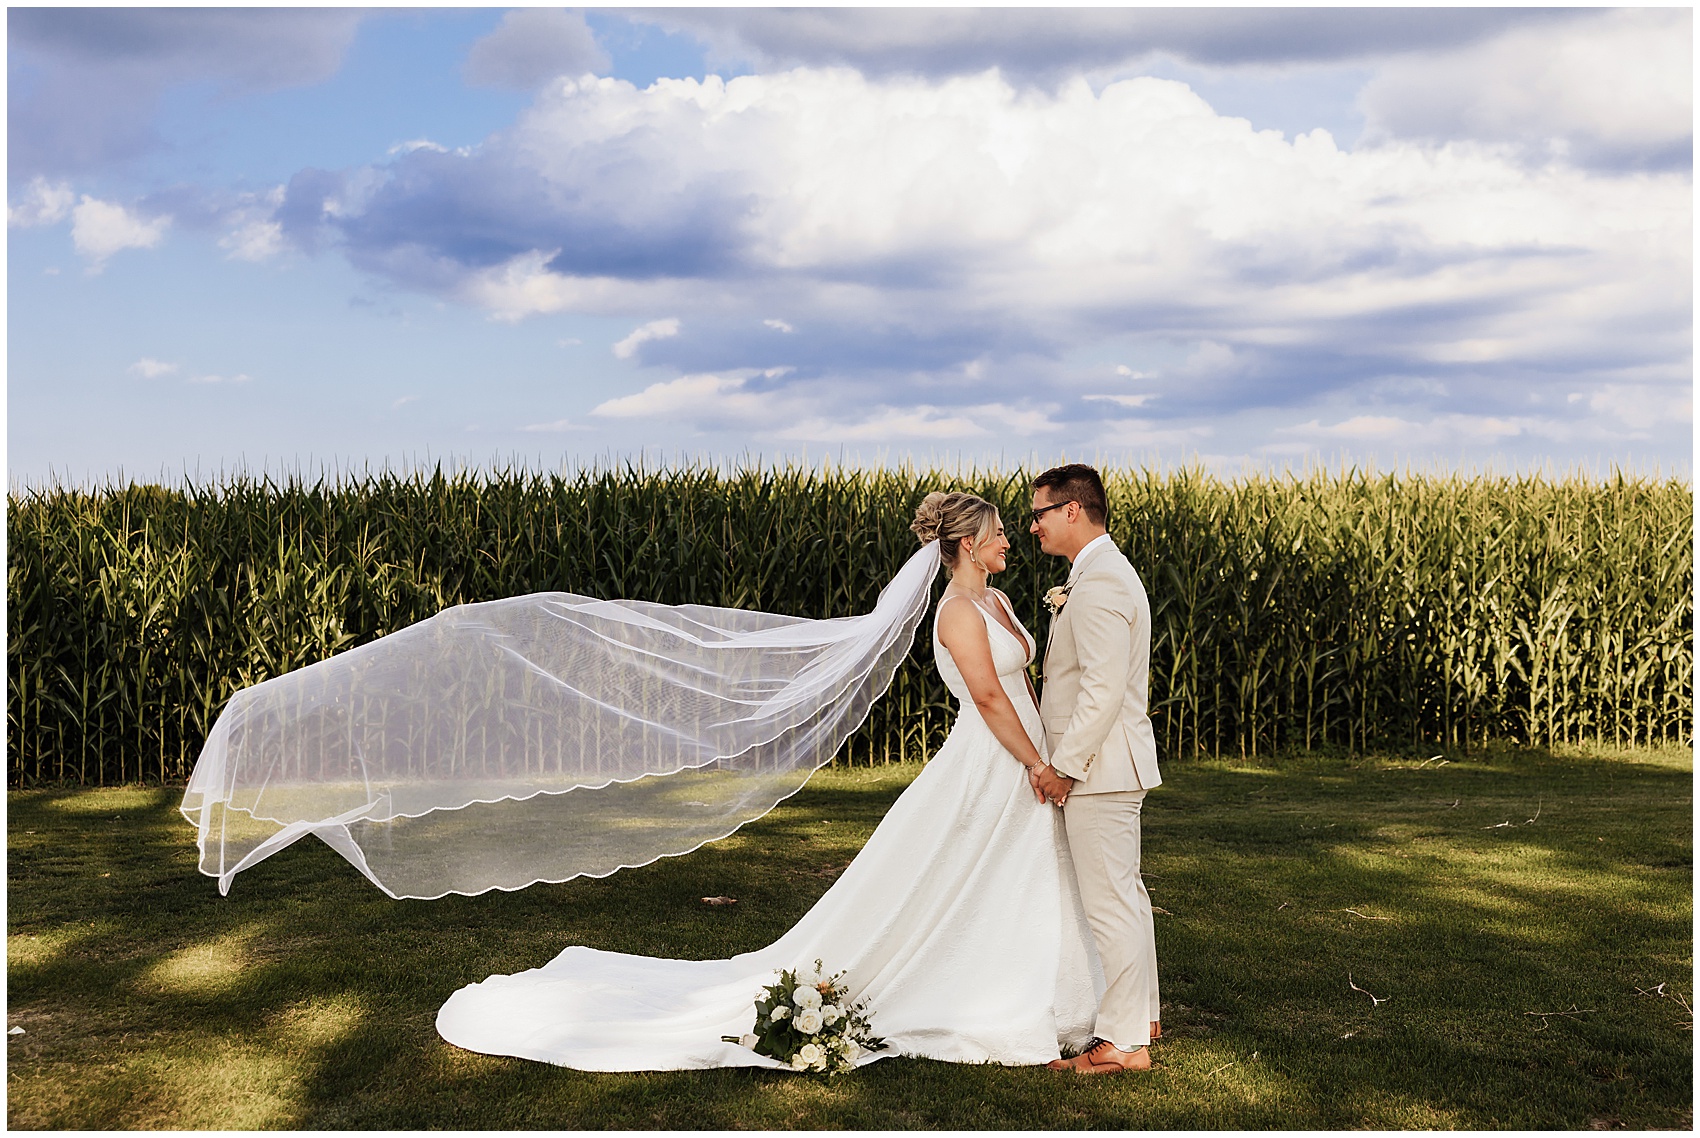 Newlyweds hold hands and stare into each other's eyes while the bride's veil flows behind her on the edge of a cornfield at a sable creek homestead wedding